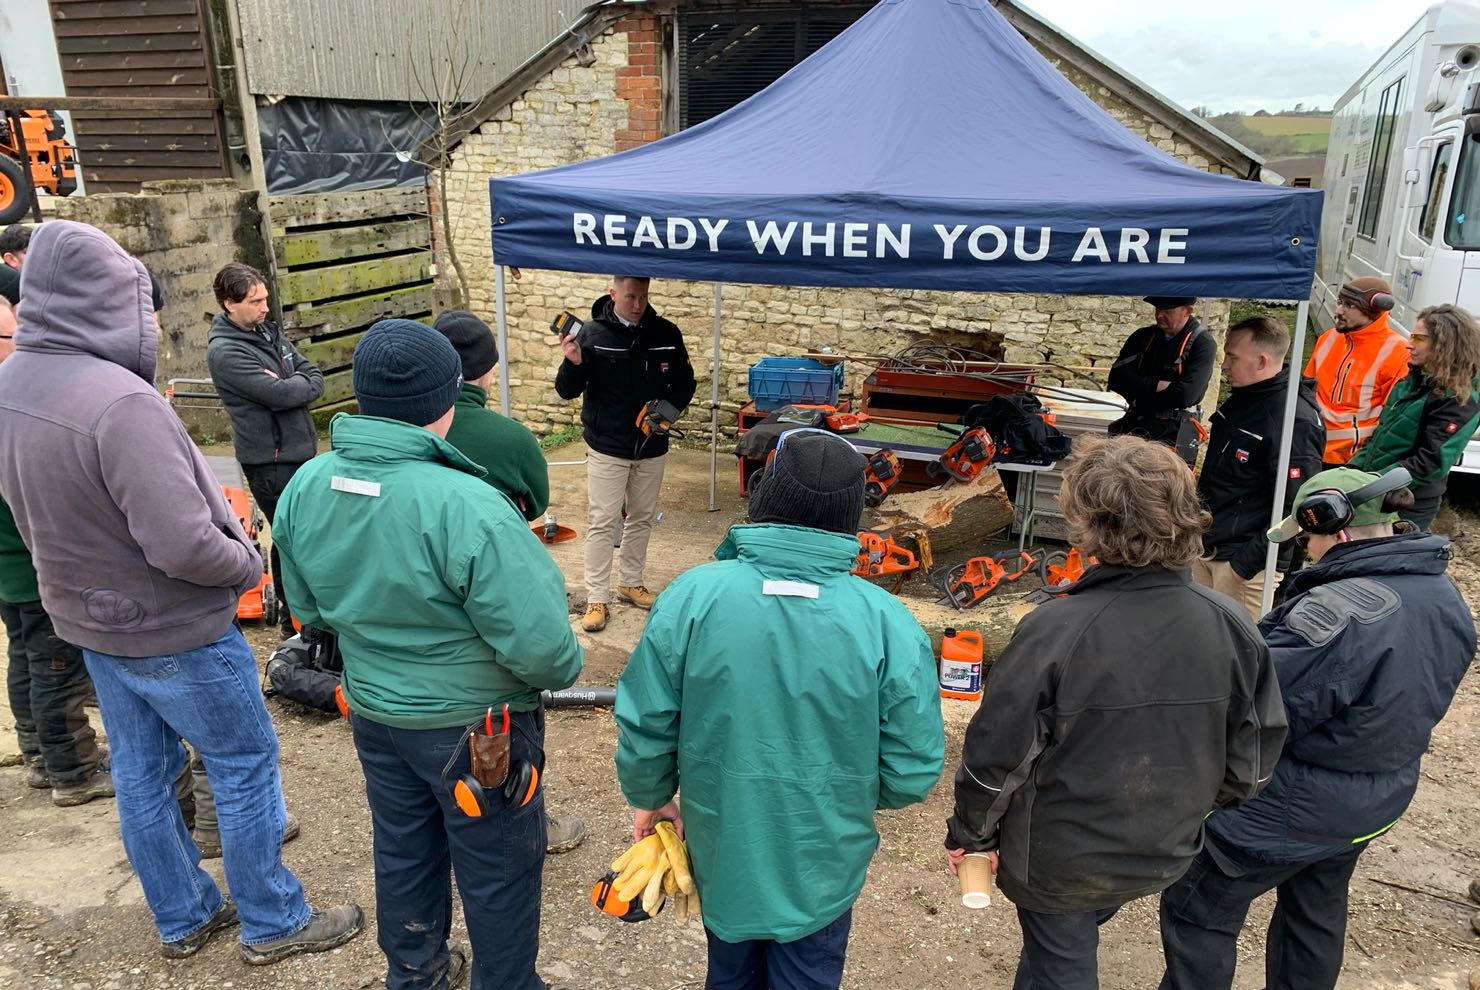 RTM Arbo Product Day 2020